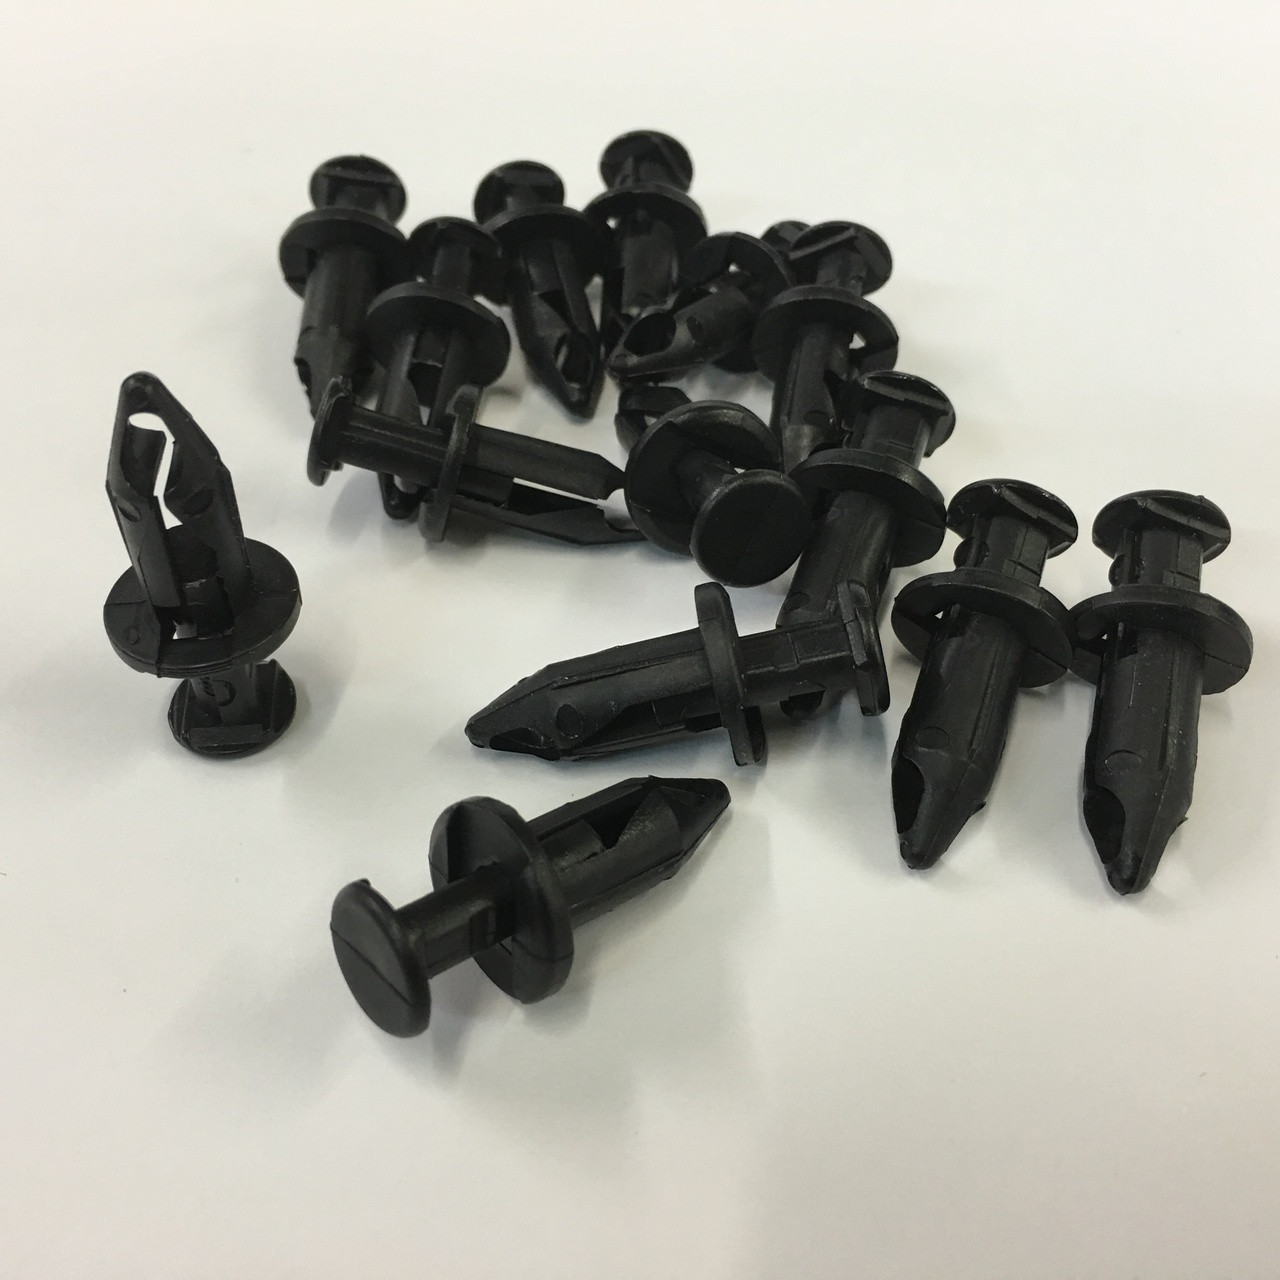 Black Nylon Replacement Push-Pins - Package of 20 (All Spyders/Rykers)